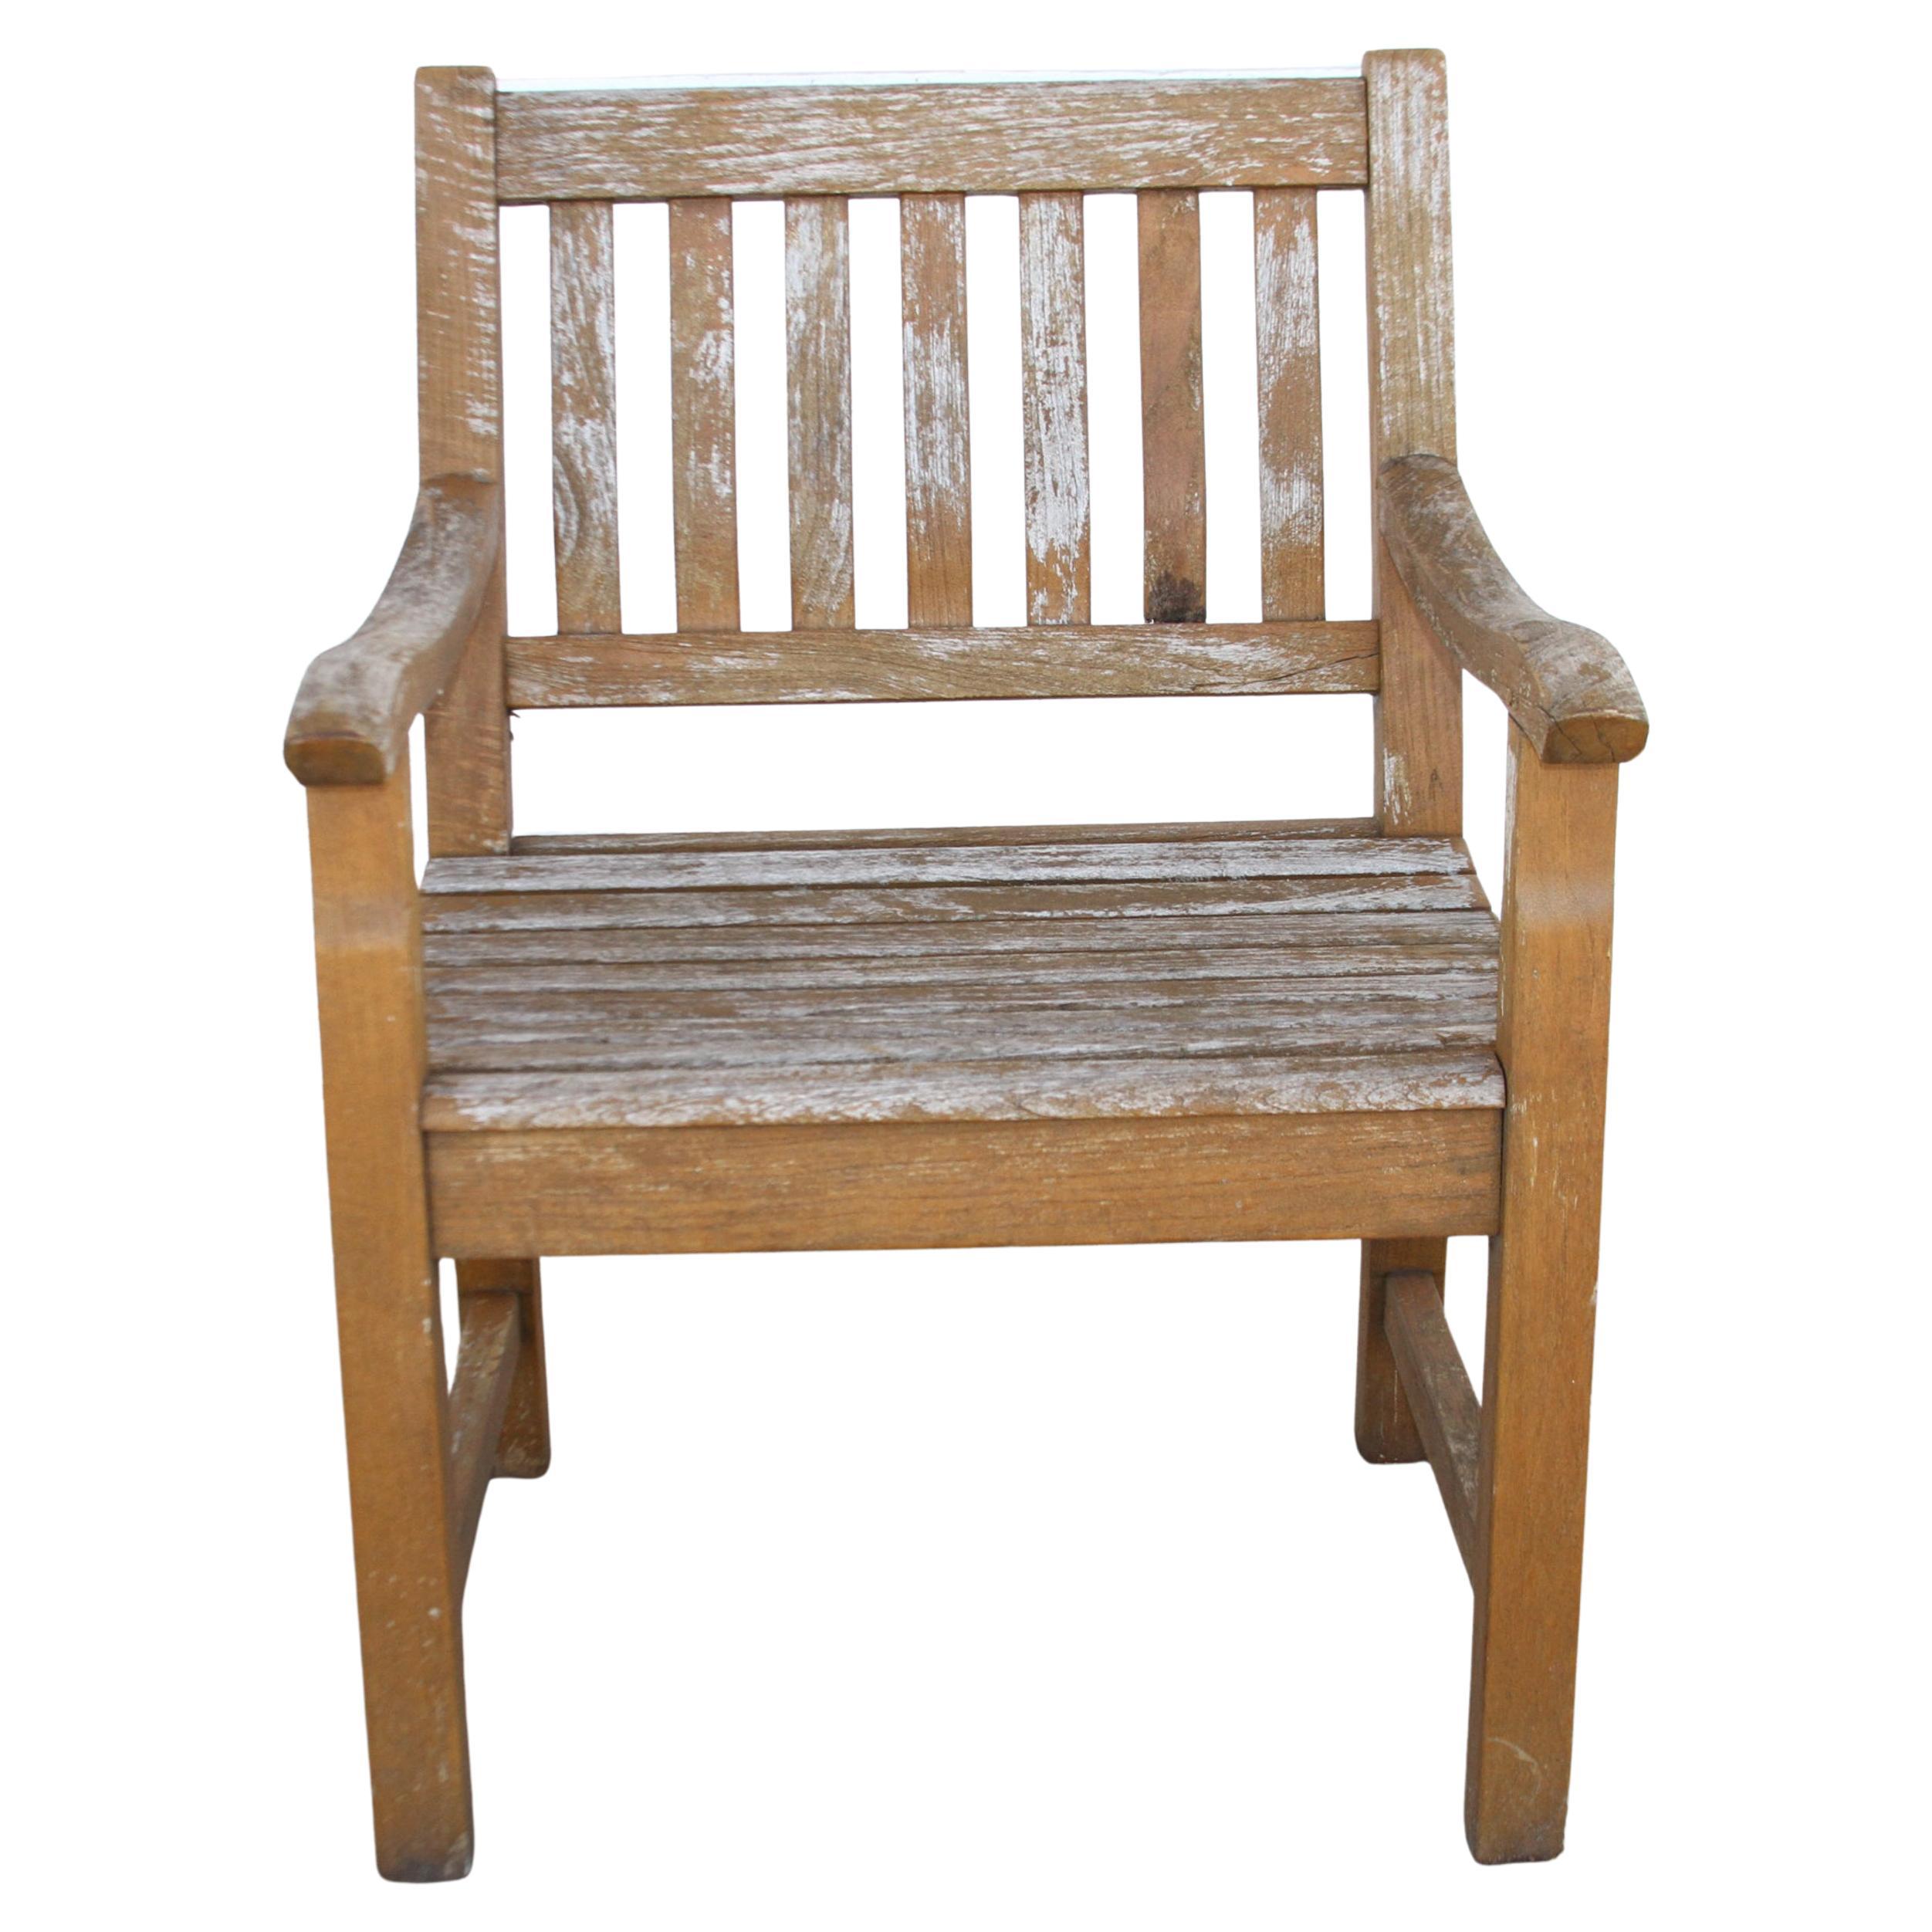 Vintage Maritime Heritage Bench Chair 